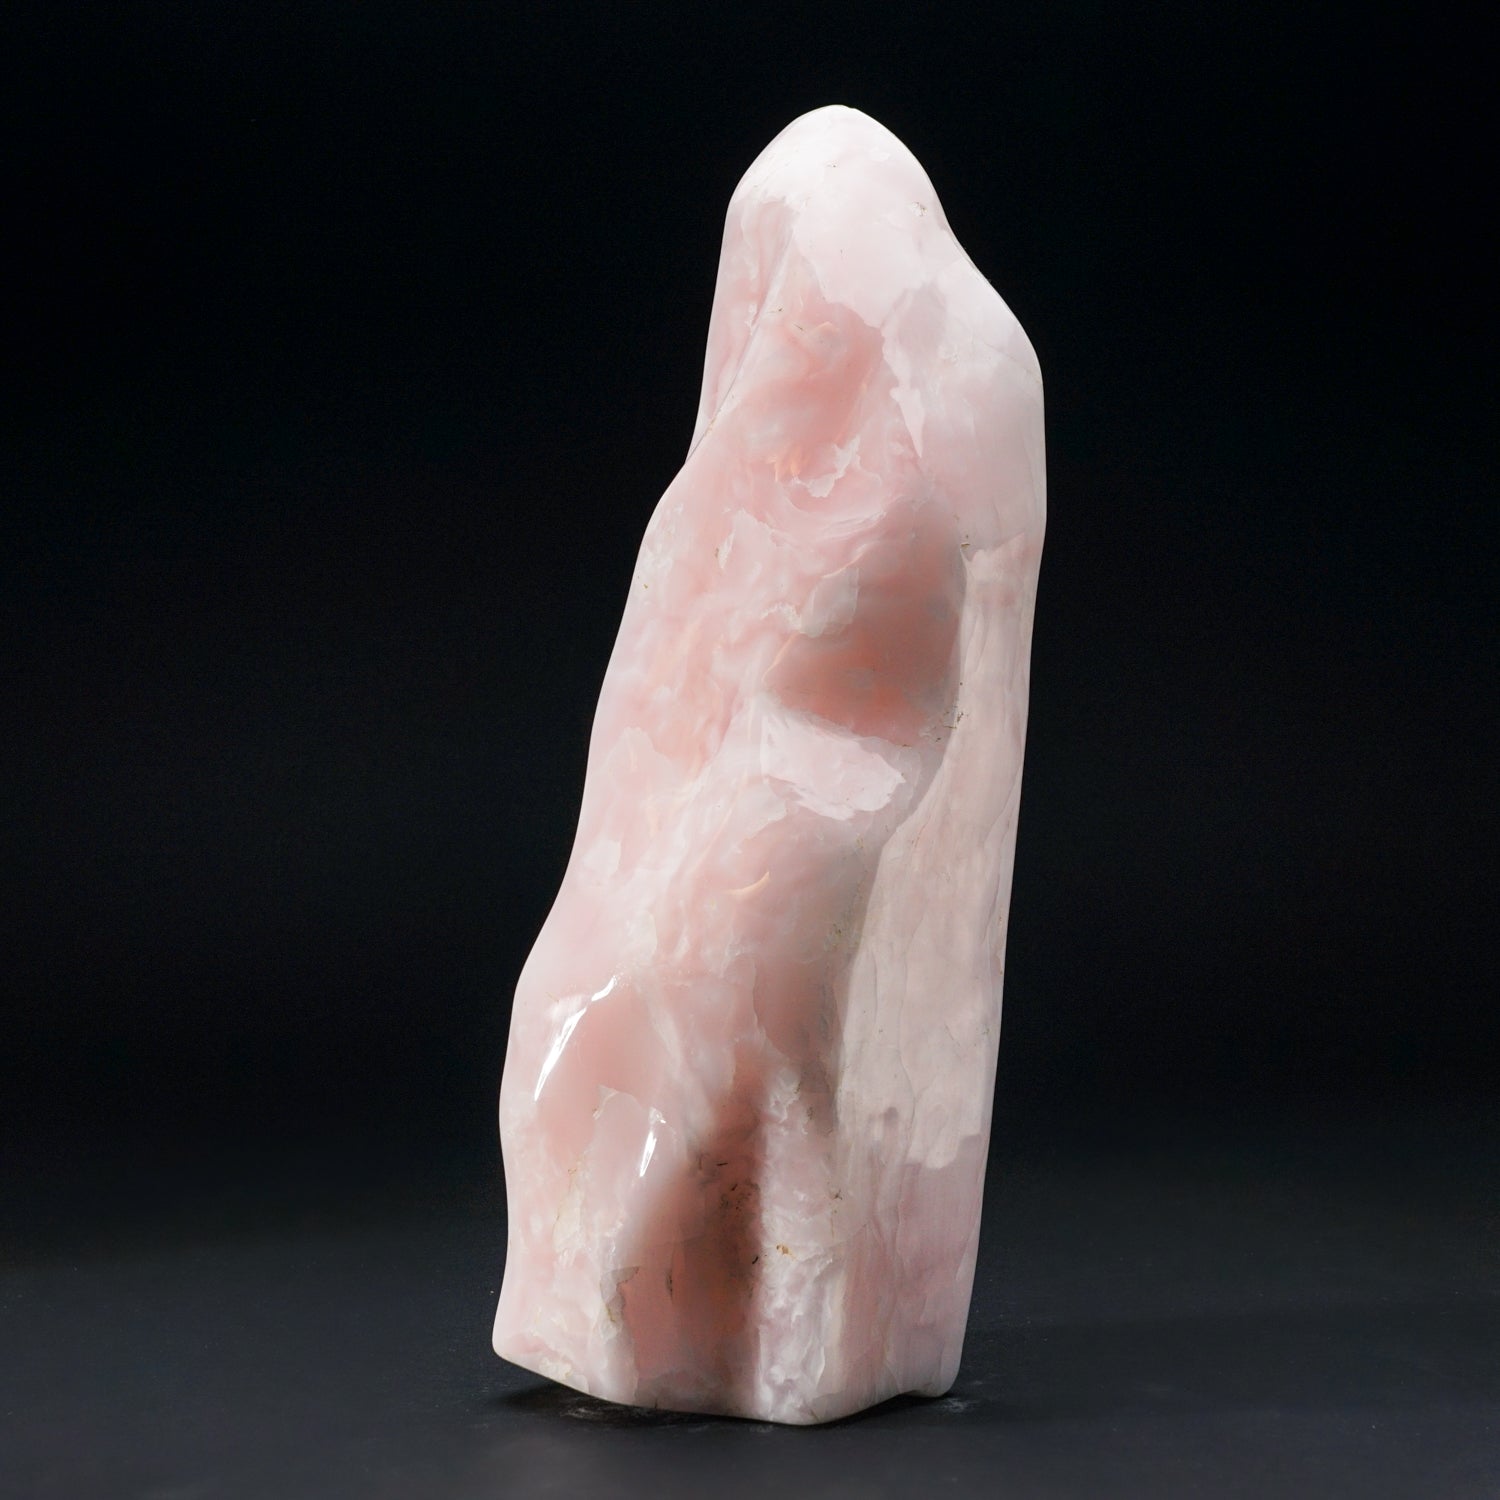 Polished Pink Mangano Calcite from Pakistan (13.6 lbs)